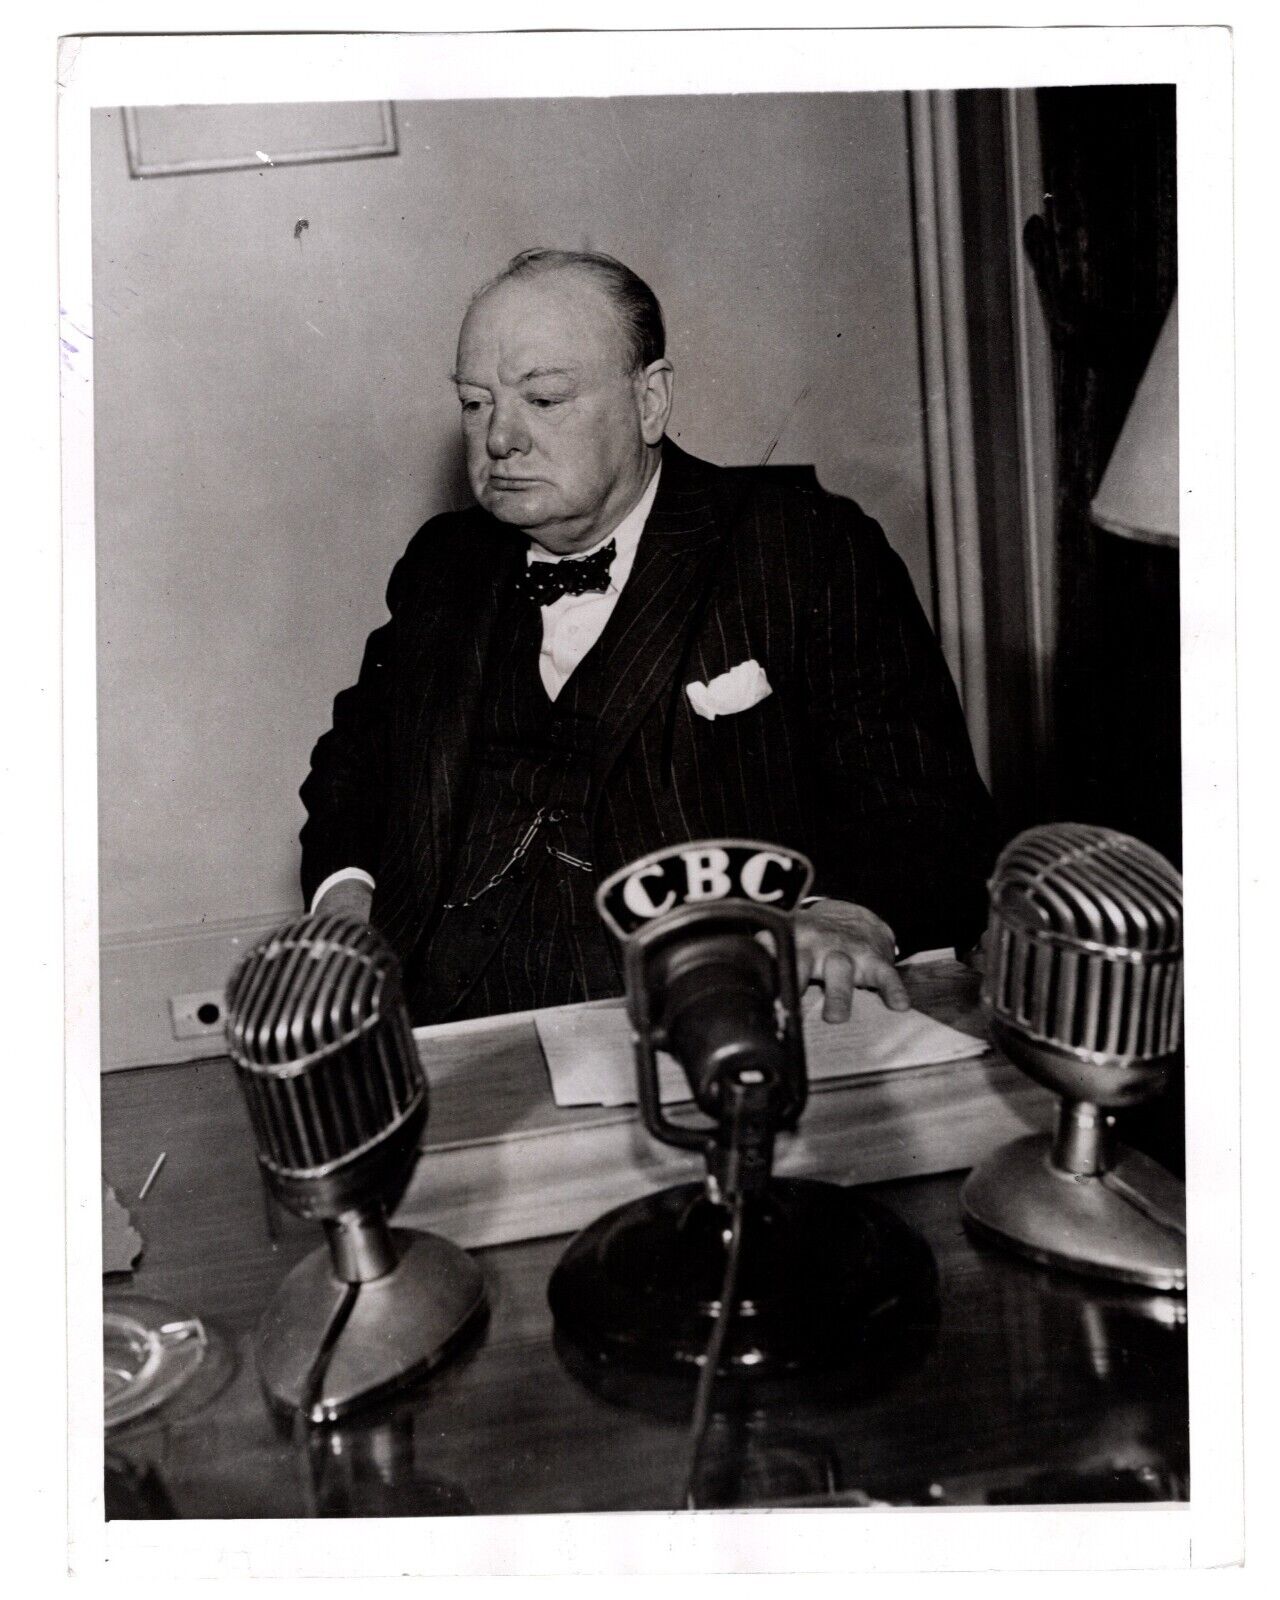 31 August 1943 press photo of Winston Churchill after the Quadrant conference